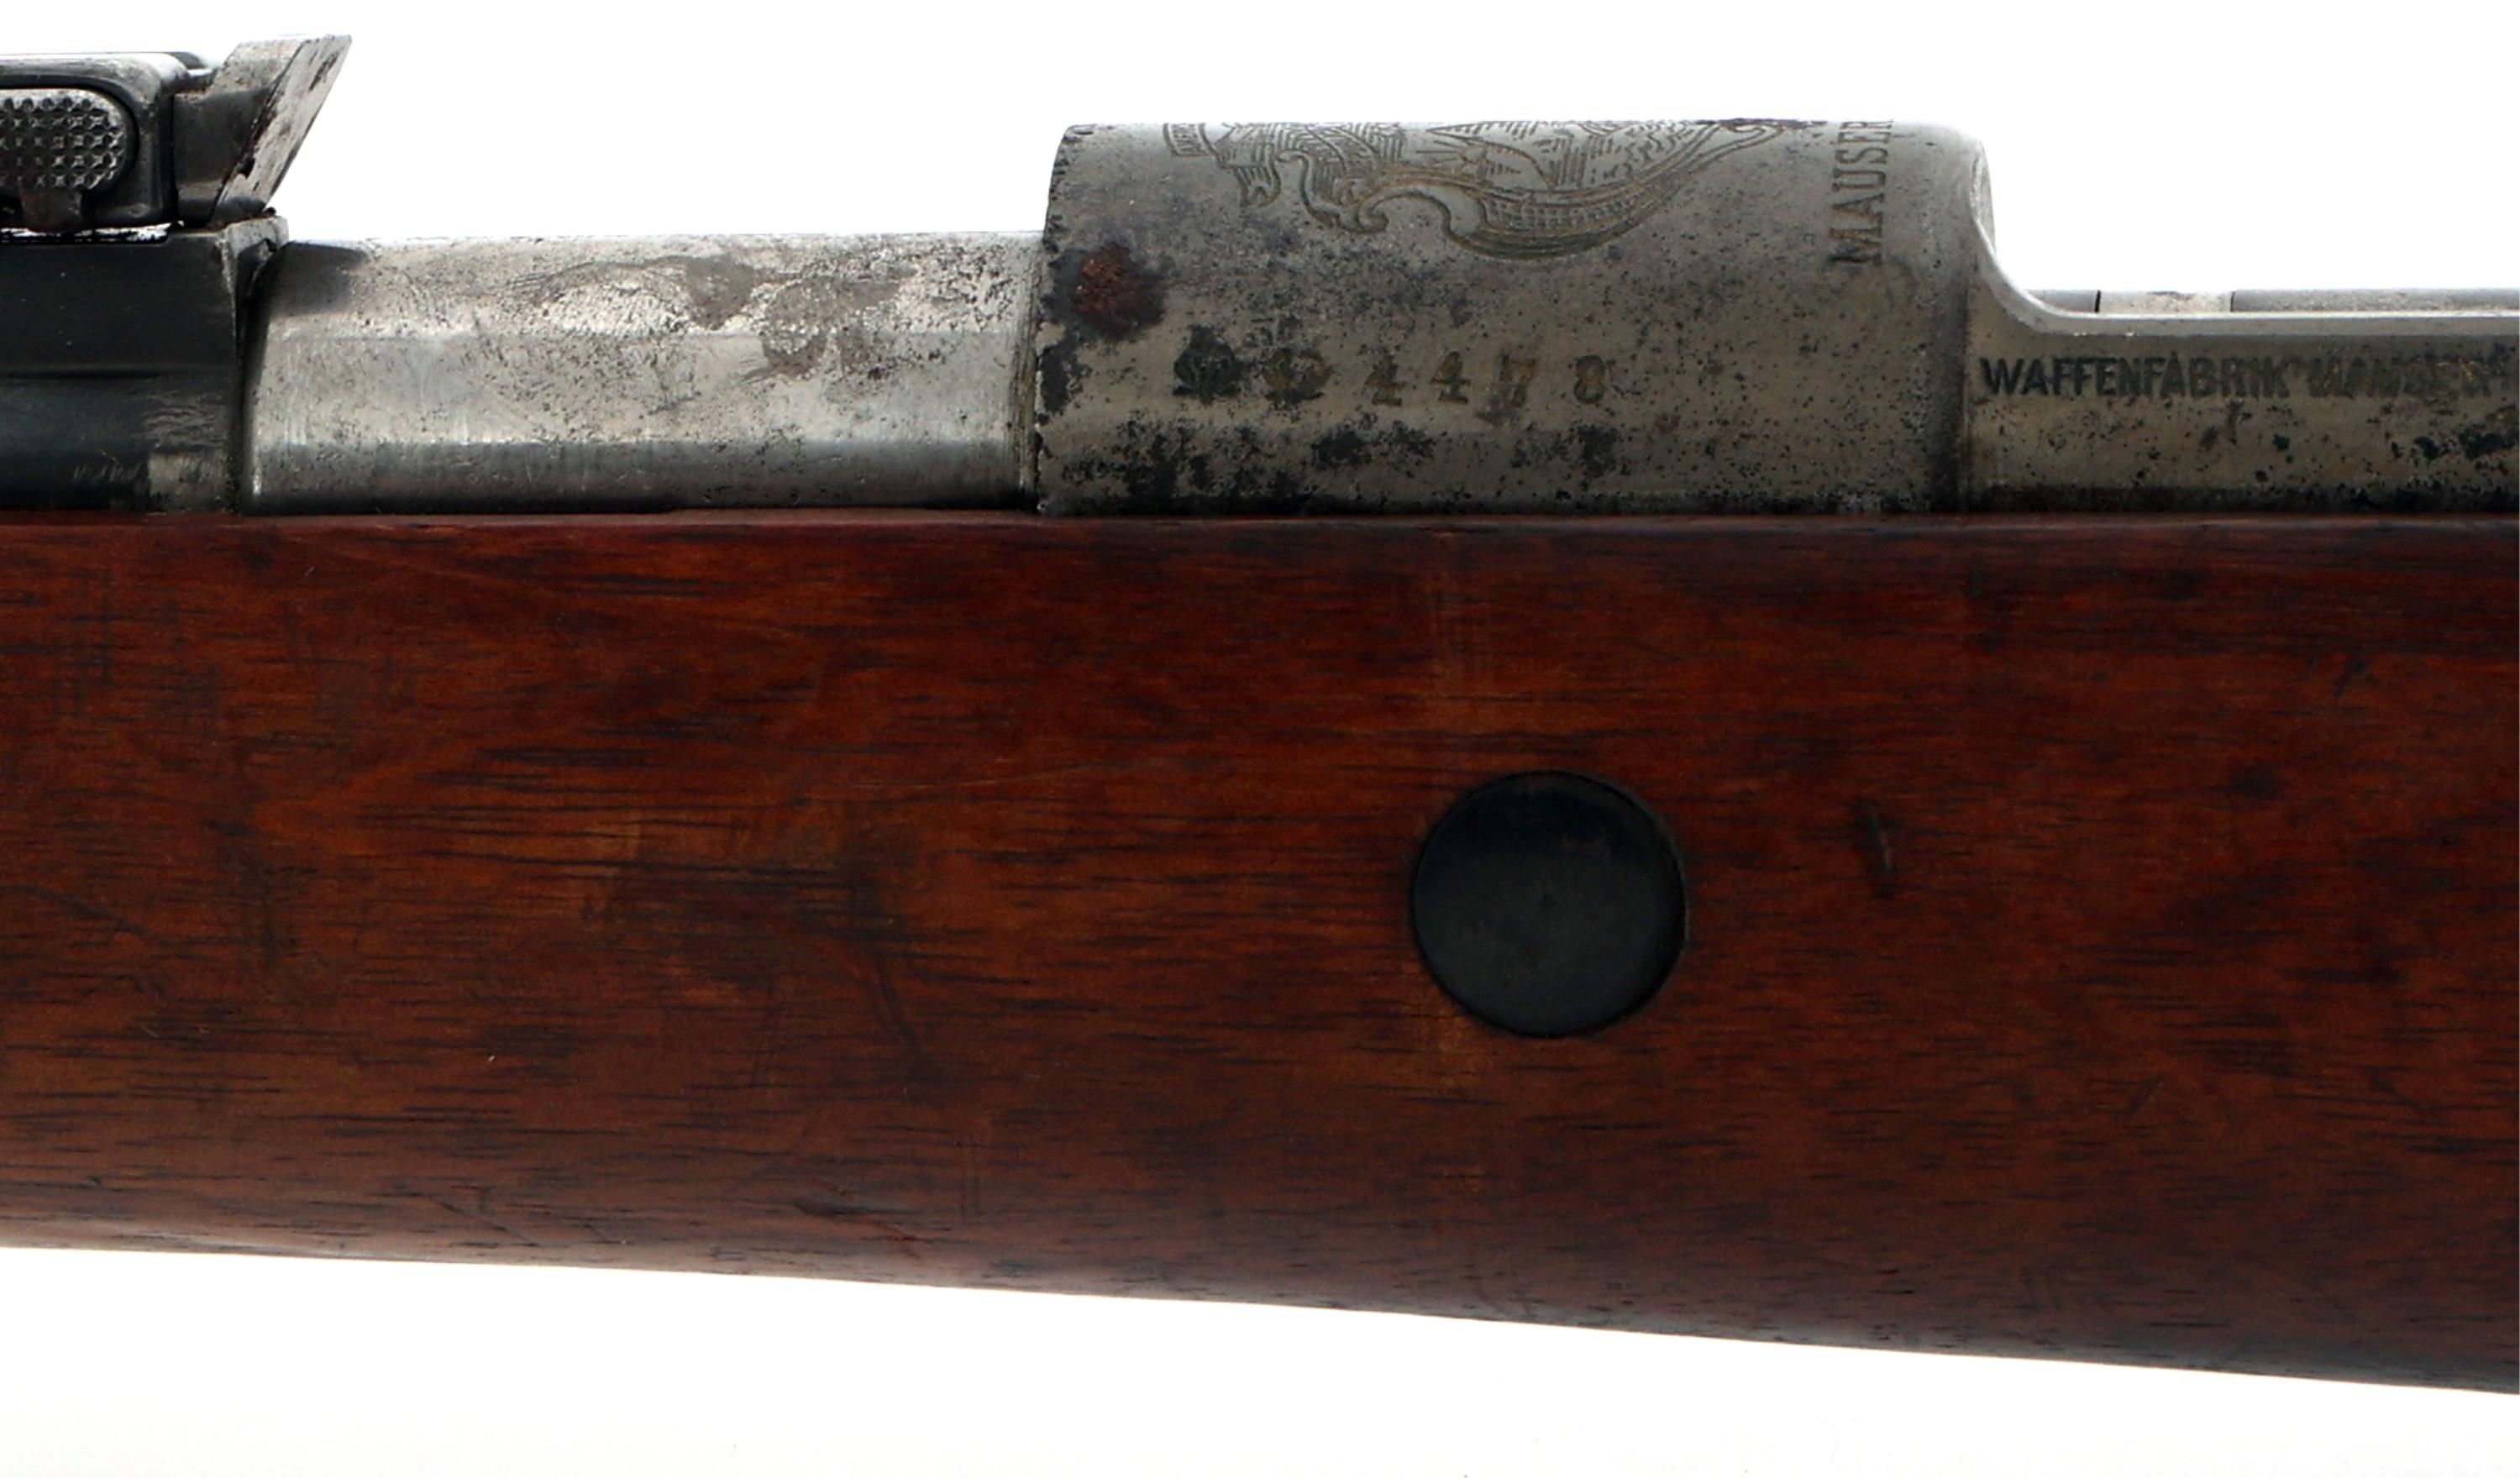 COSTA RICAN MAUSER MODEL 1910 RIFLE FOR PARTS